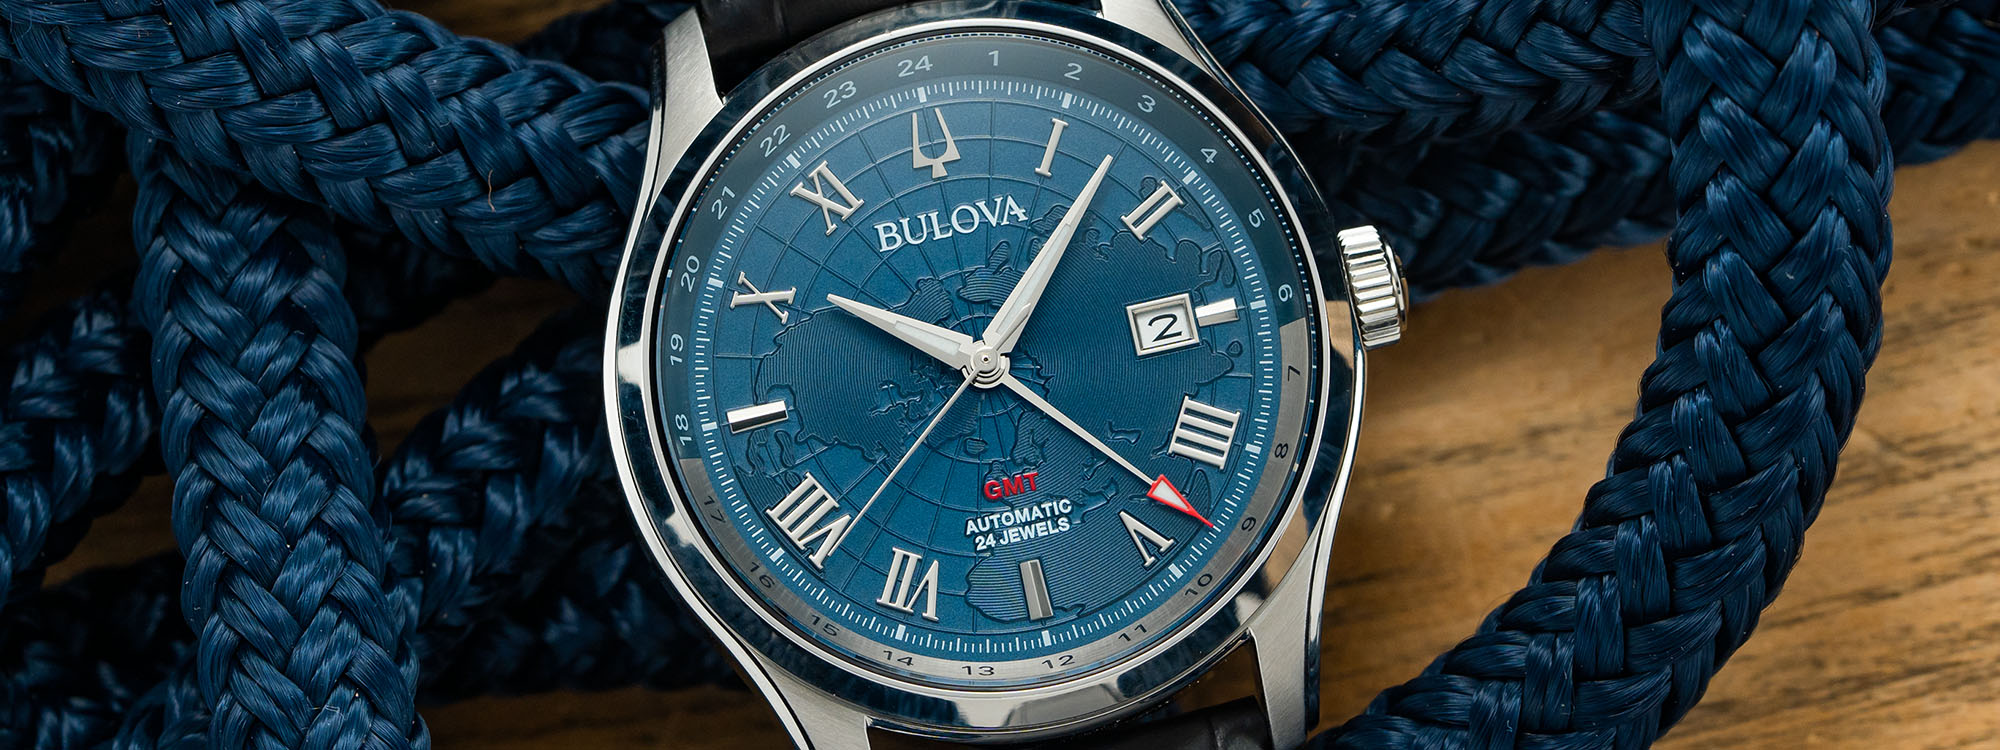 Are Bulova Watches Good Buys? Here are 10 Watches that will Convince You